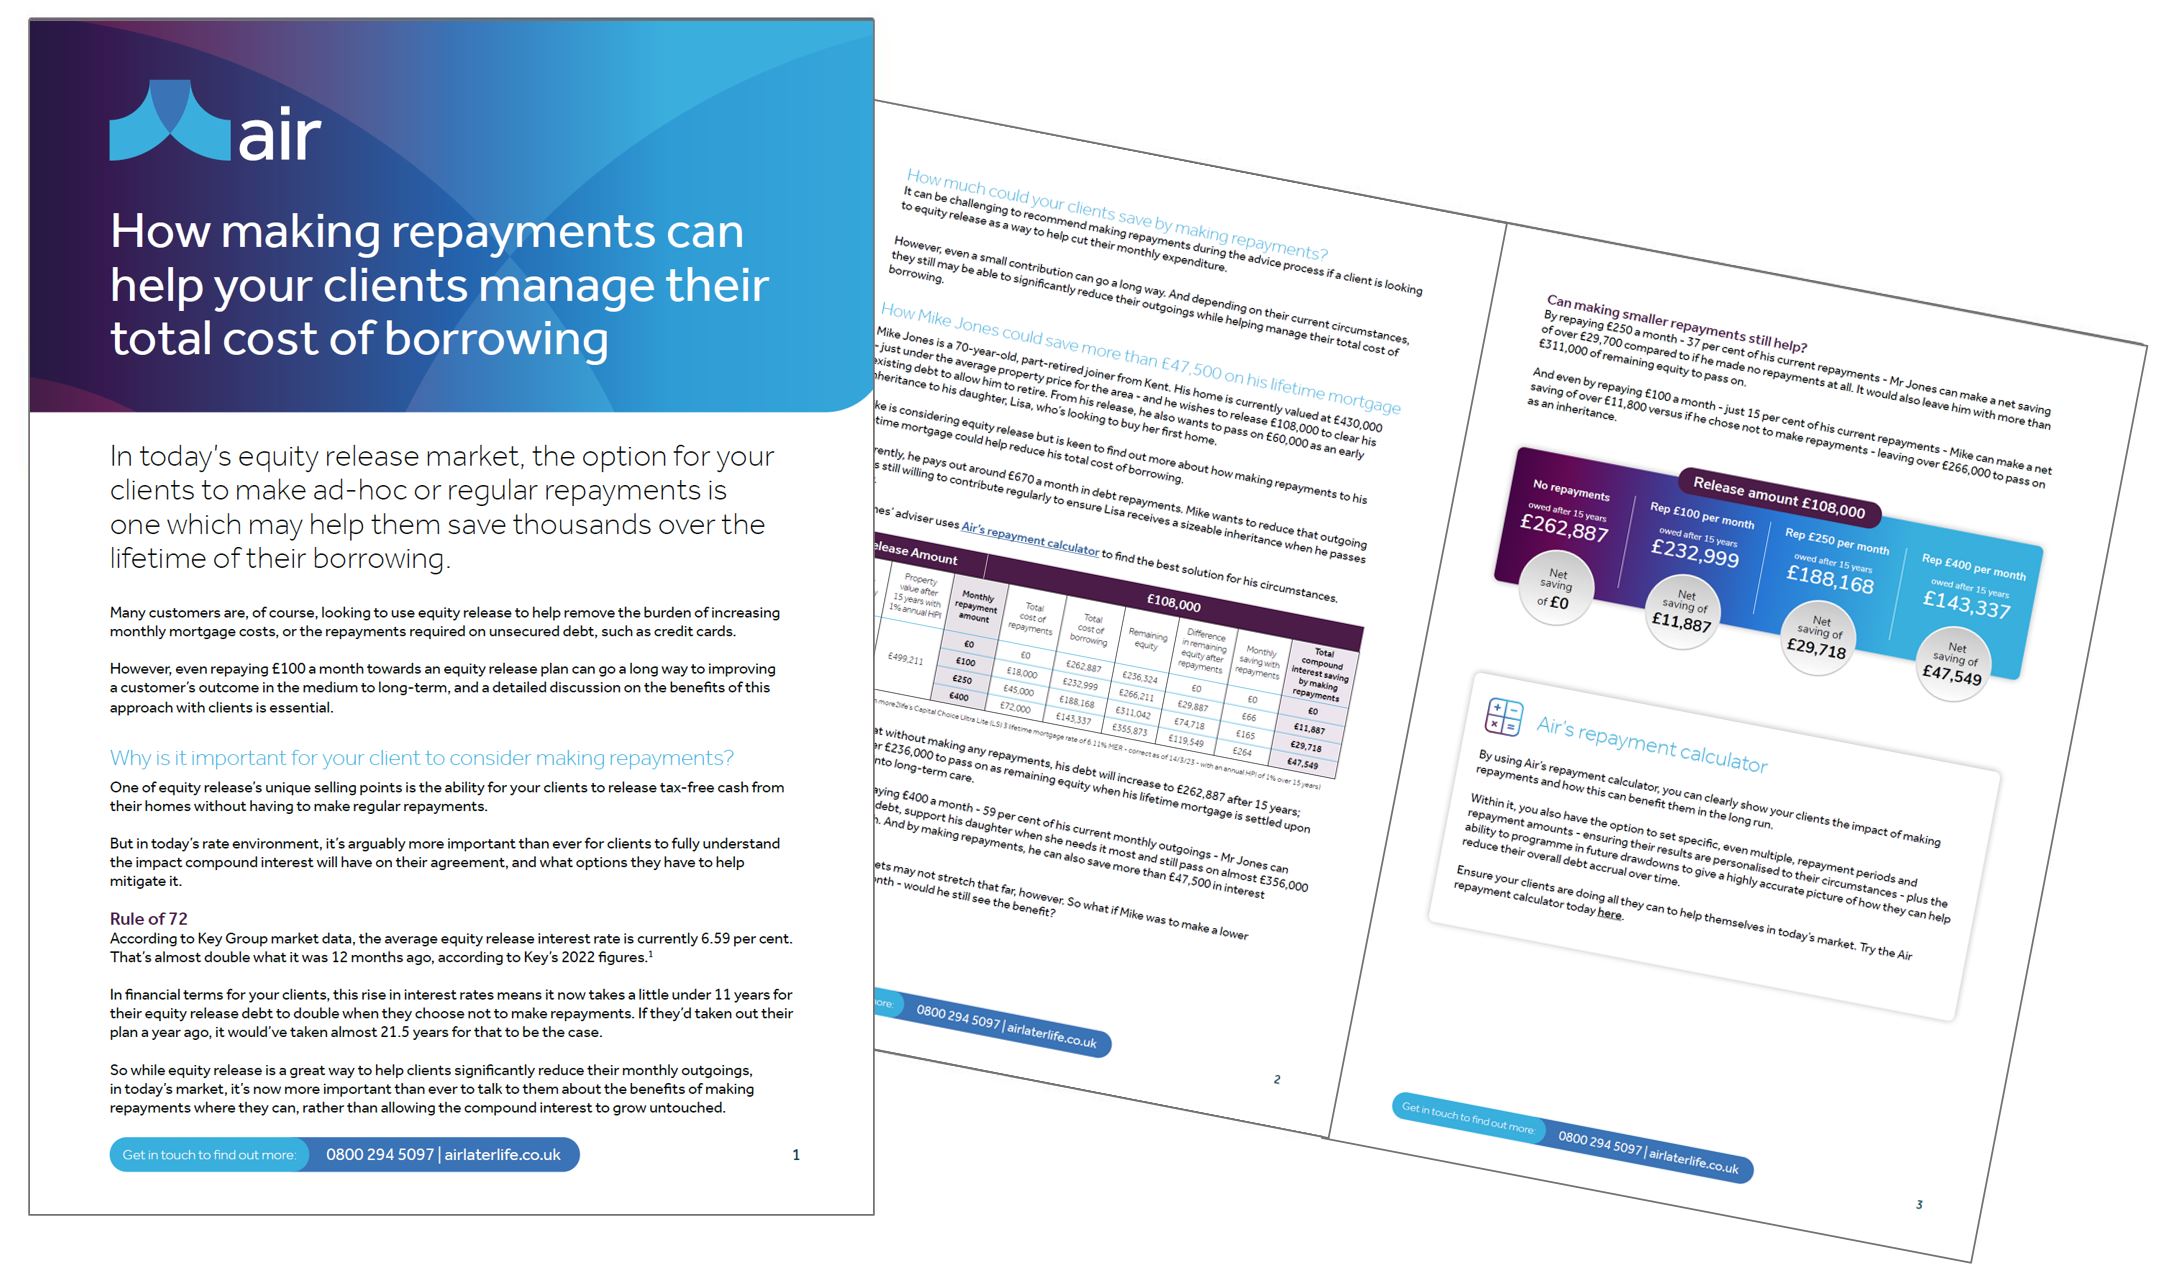 How making repayments can help your clients manage their total cost of borrowing